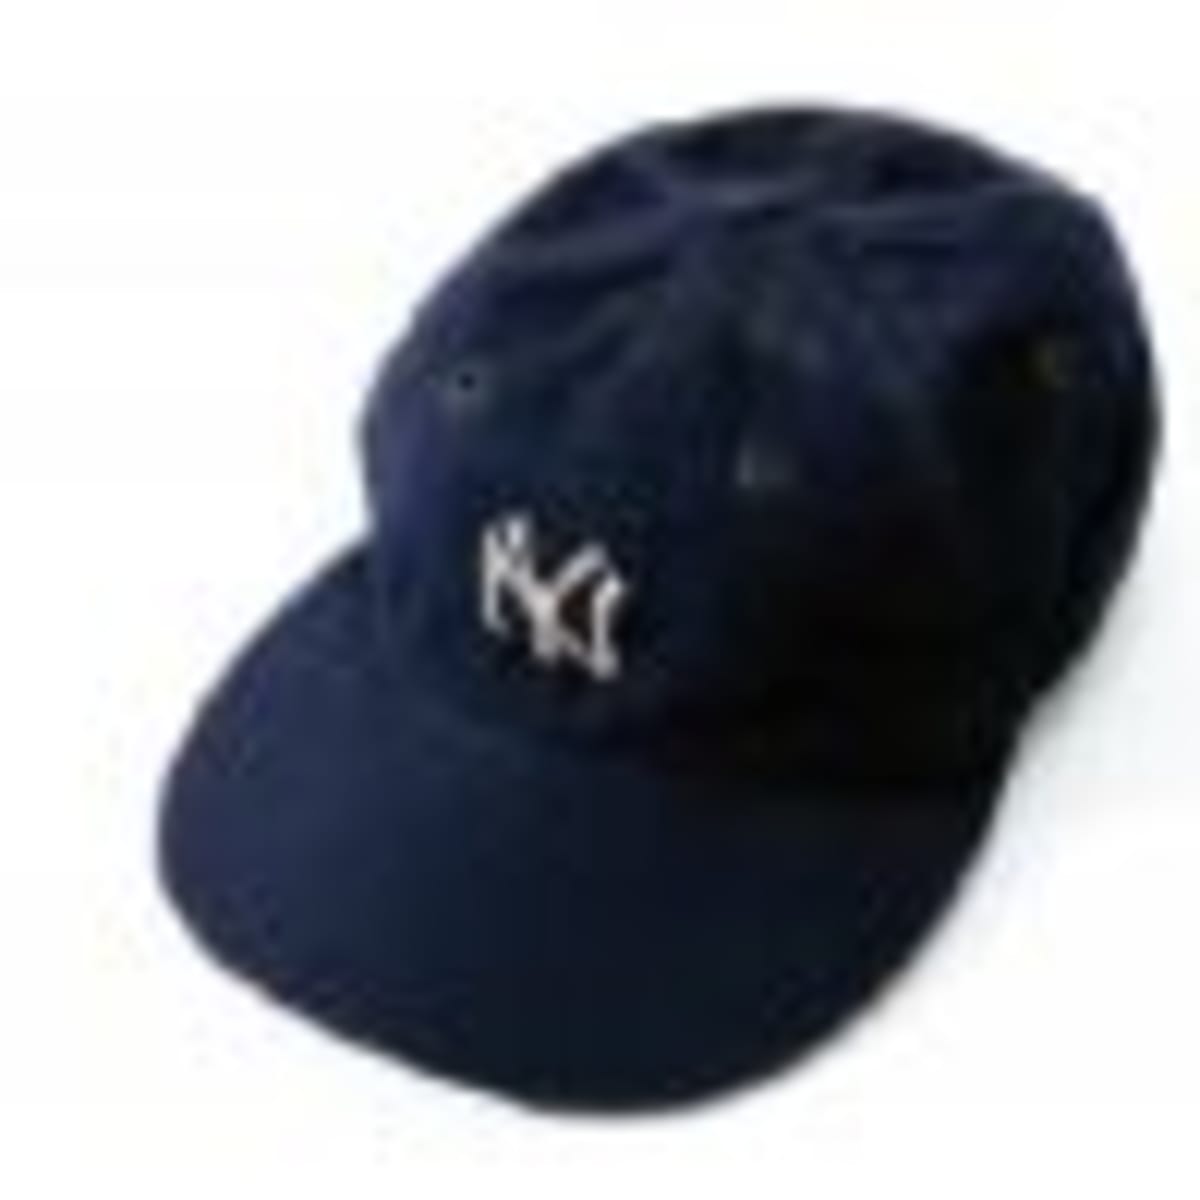 Ongoing Babe Collectors Digest Ruth Cap Surpasses by Wells Bidding - David Owned Sports $225,000,